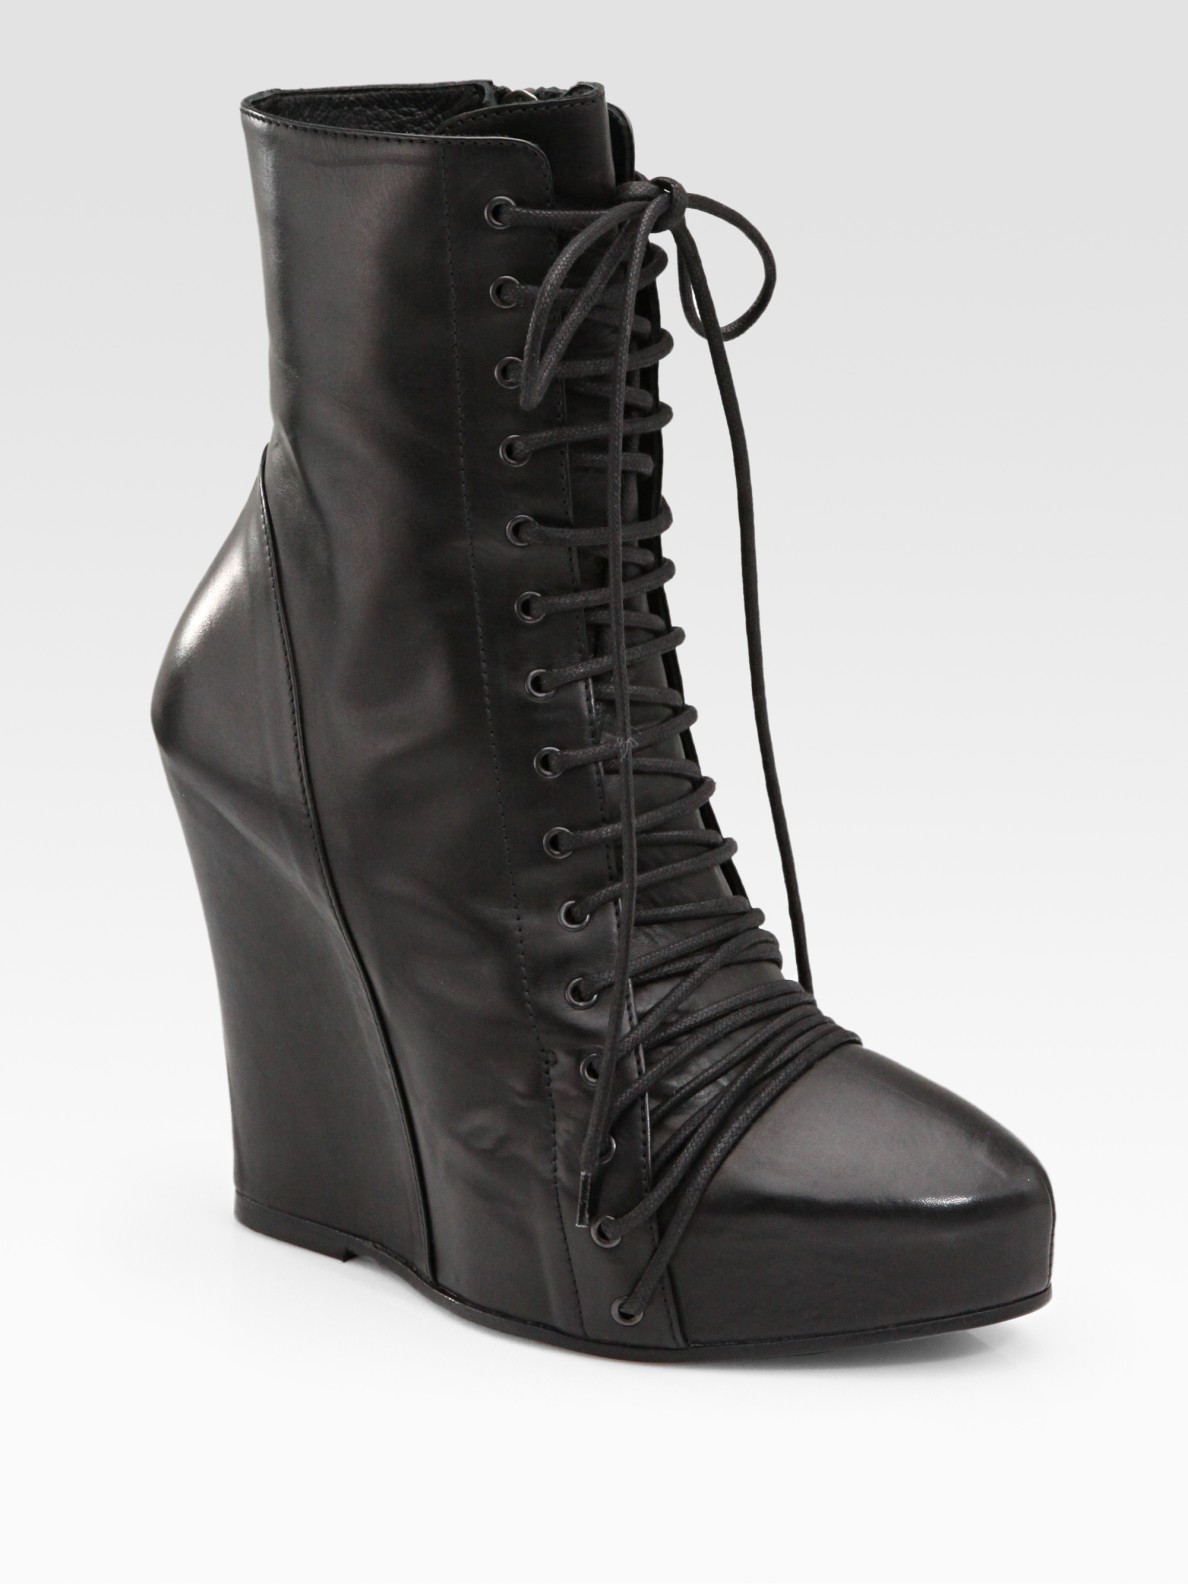 Ann Demeulemeester Leather Lace Up Wedge Ankle Boots In Black Lyst